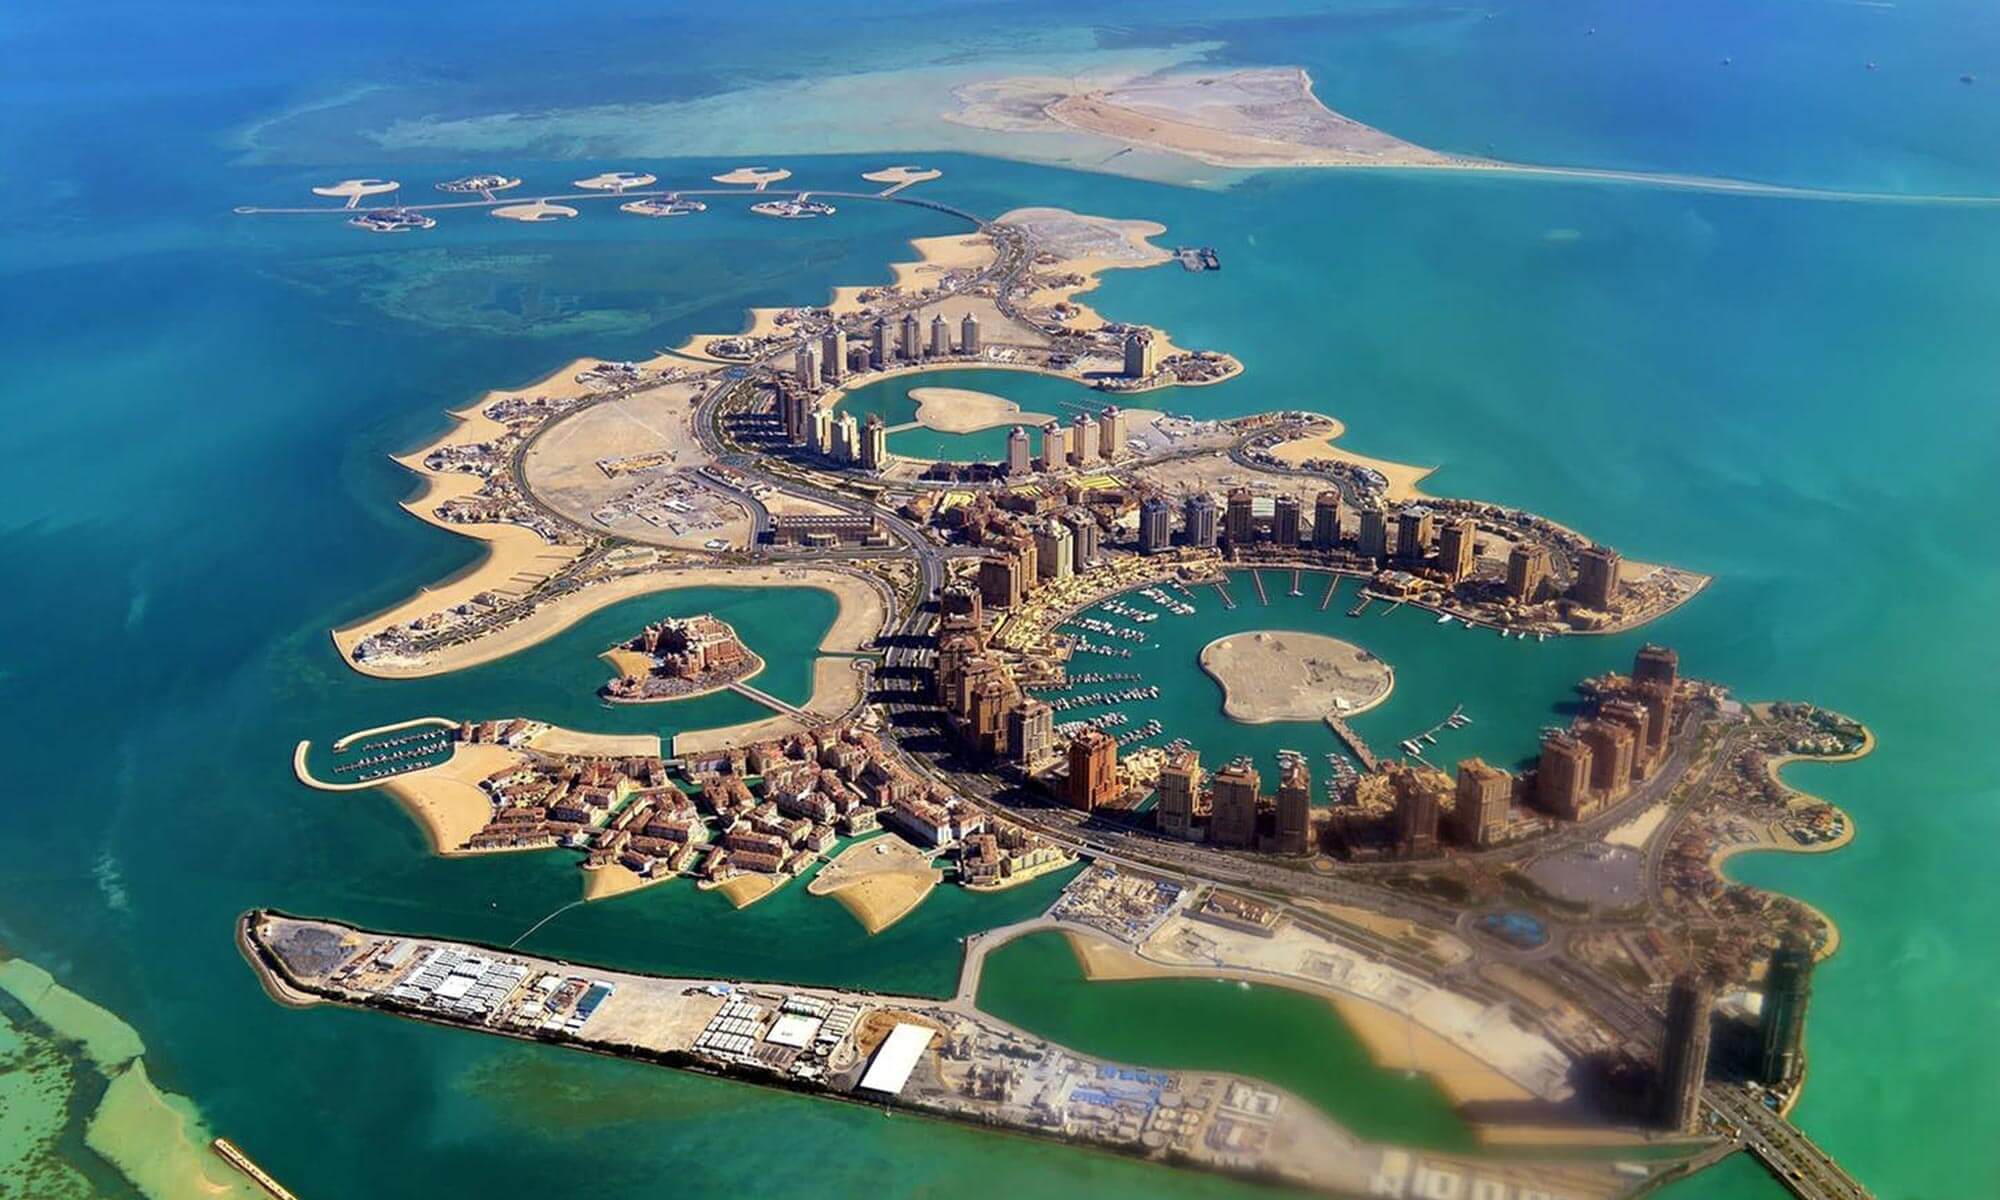 Discover some of the most popular tourist attractions in Qatar